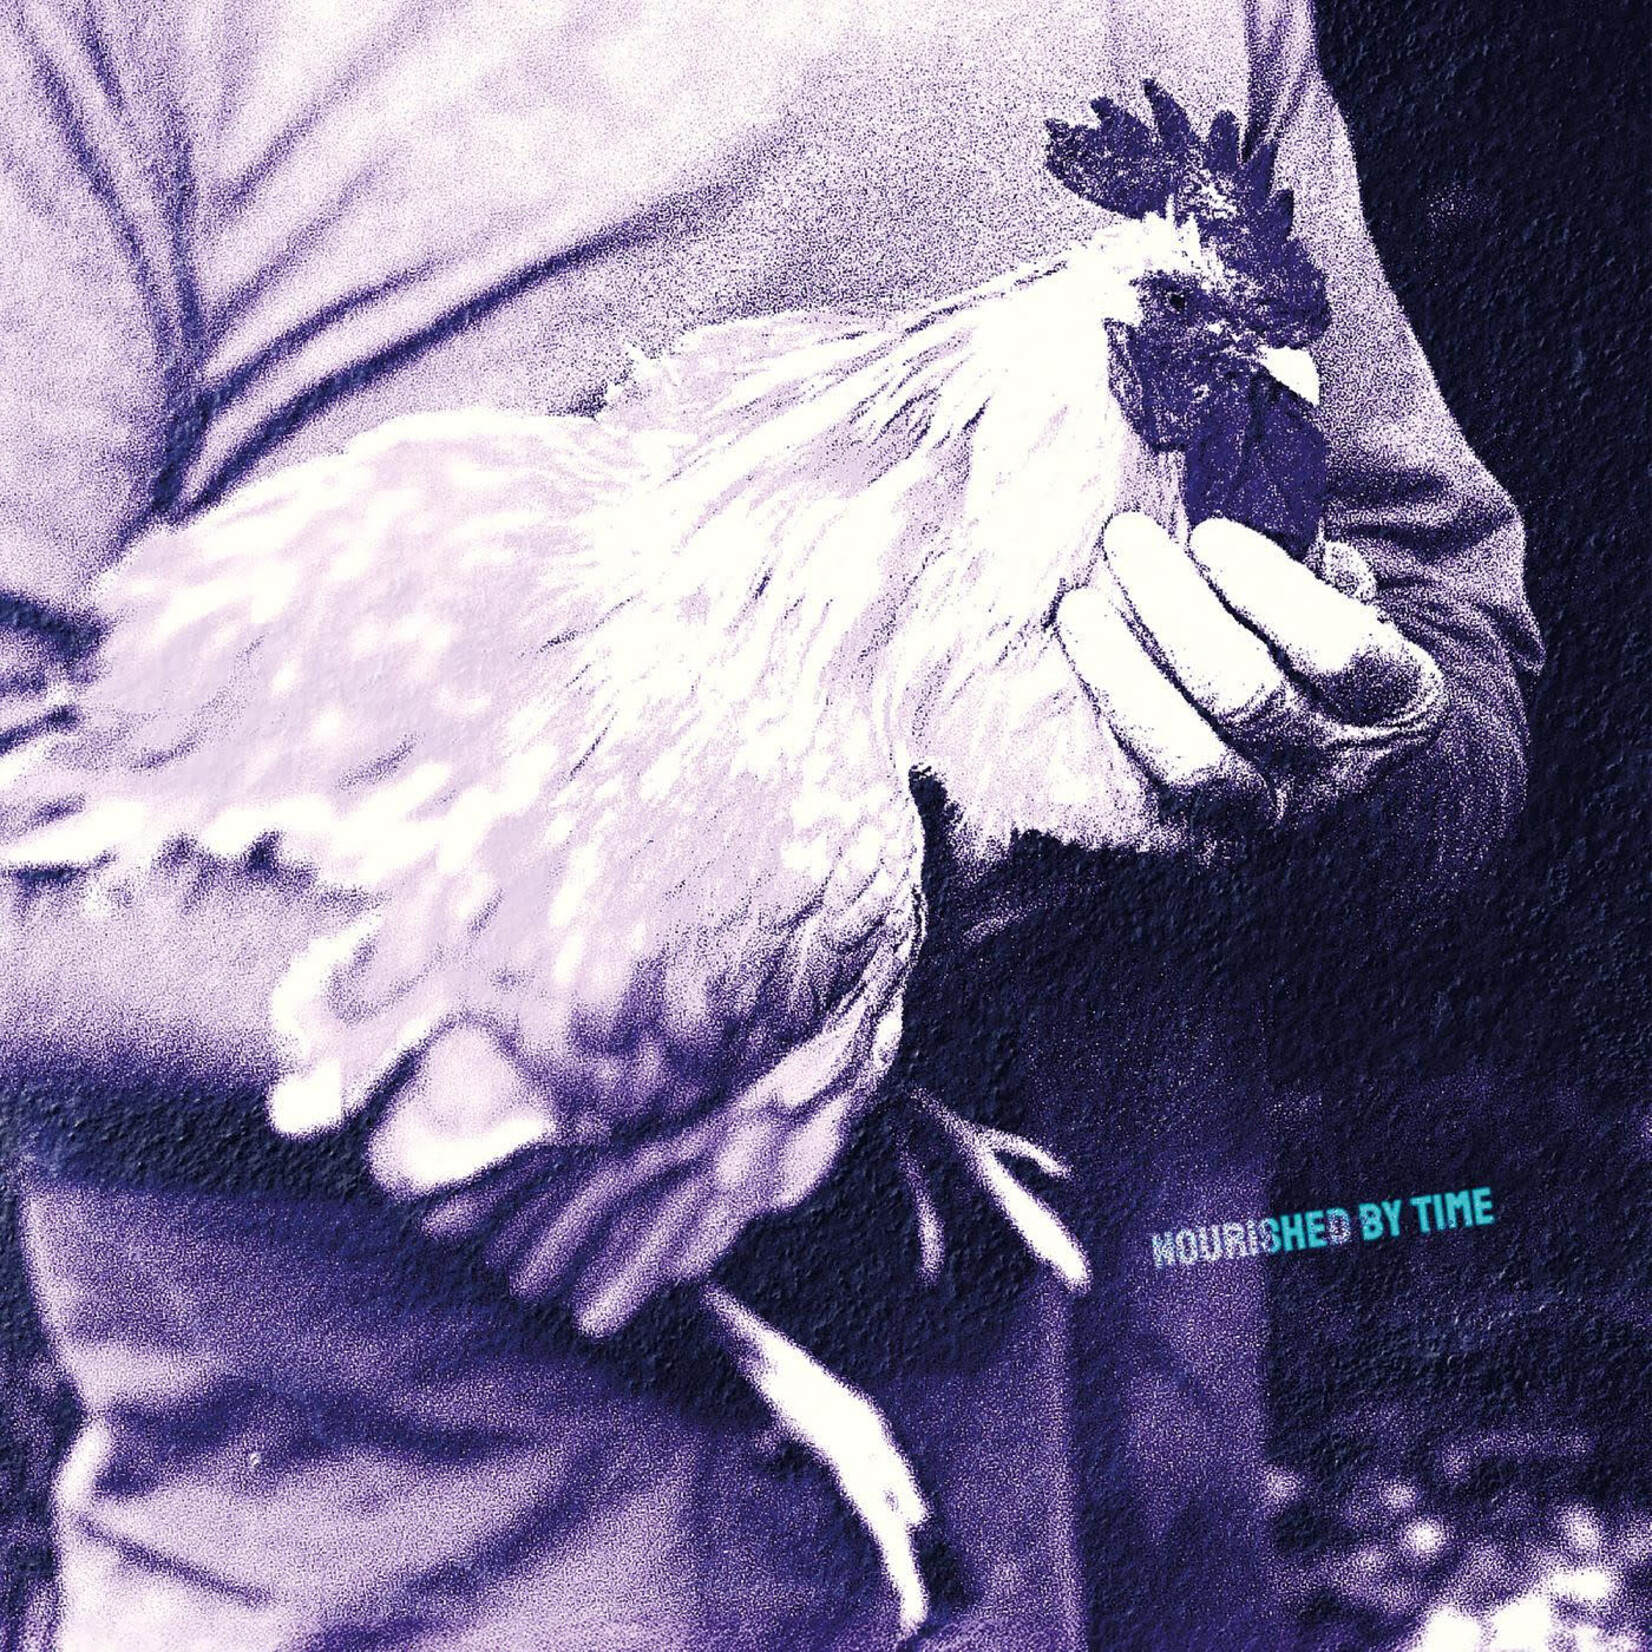 XL Recordings PRE-ORDER Nourished by Time - Catching Chickens (12")